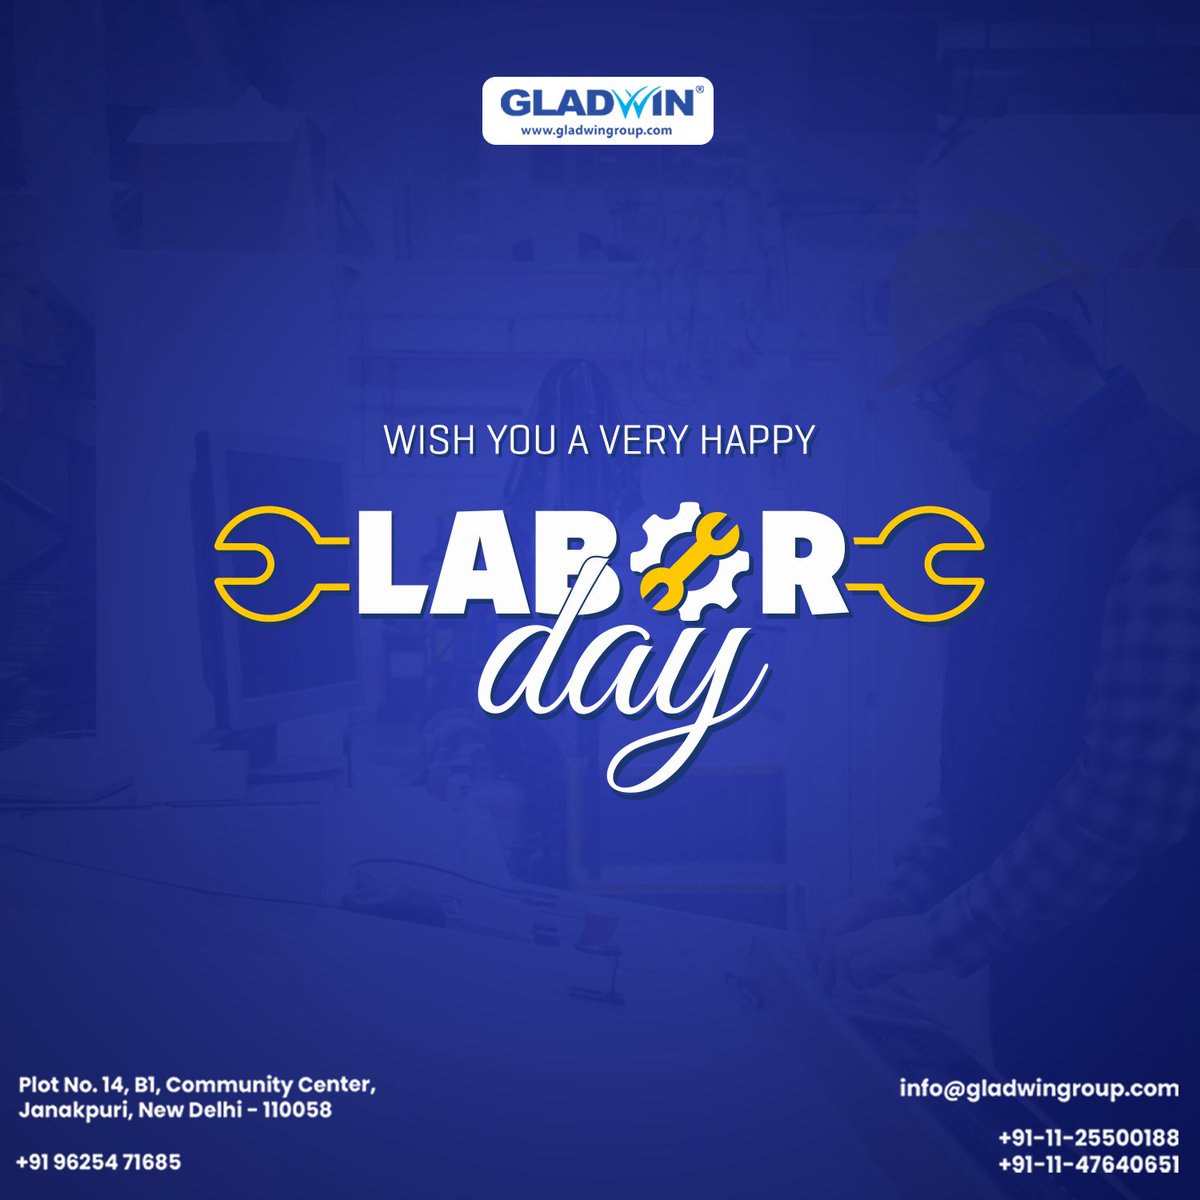 Happy Labor Day from Gladwin Group, a leading manufacturer of interactive flat panel displays, all in one PCs, kiosks, LED walls, and much more! 🛠️

Today, we celebrate the hard work and dedication of workers everywhere.

#laborday #gladwingroup #interactiveflatpanel #allinonepc